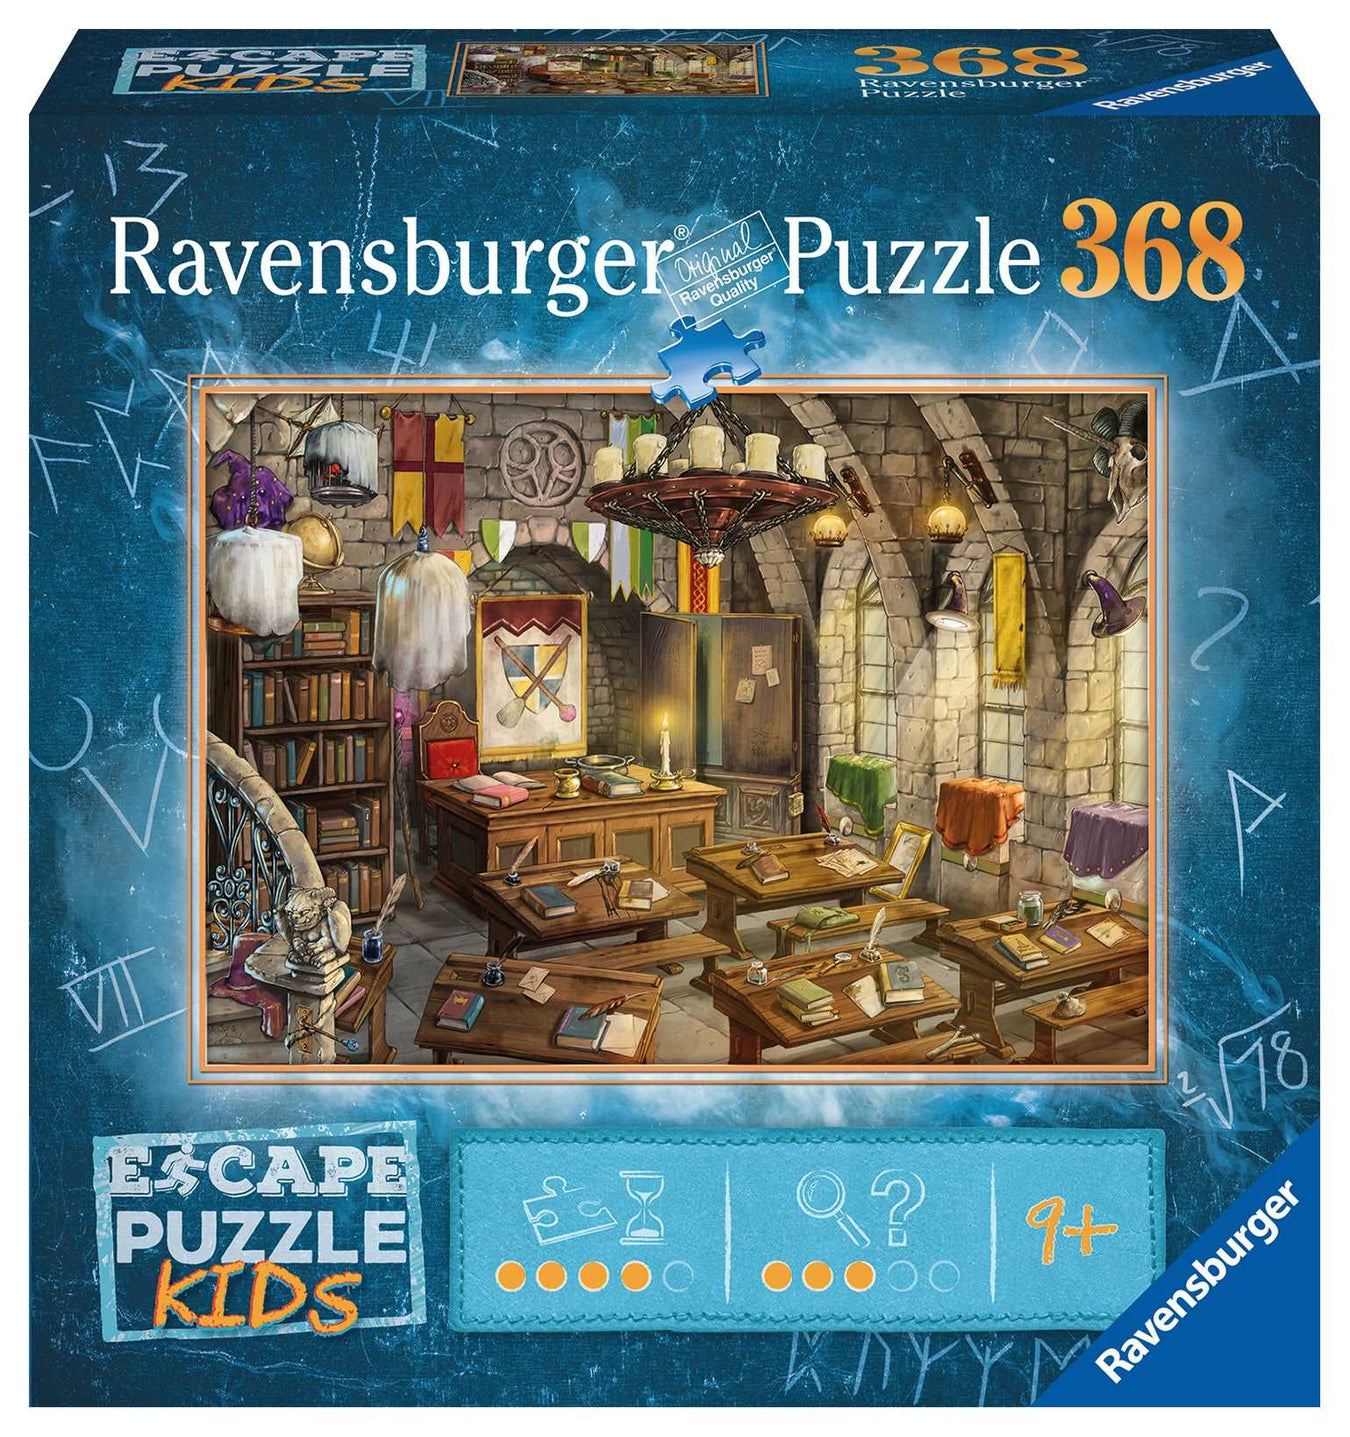 Over 300 Pieces Kids Puzzles